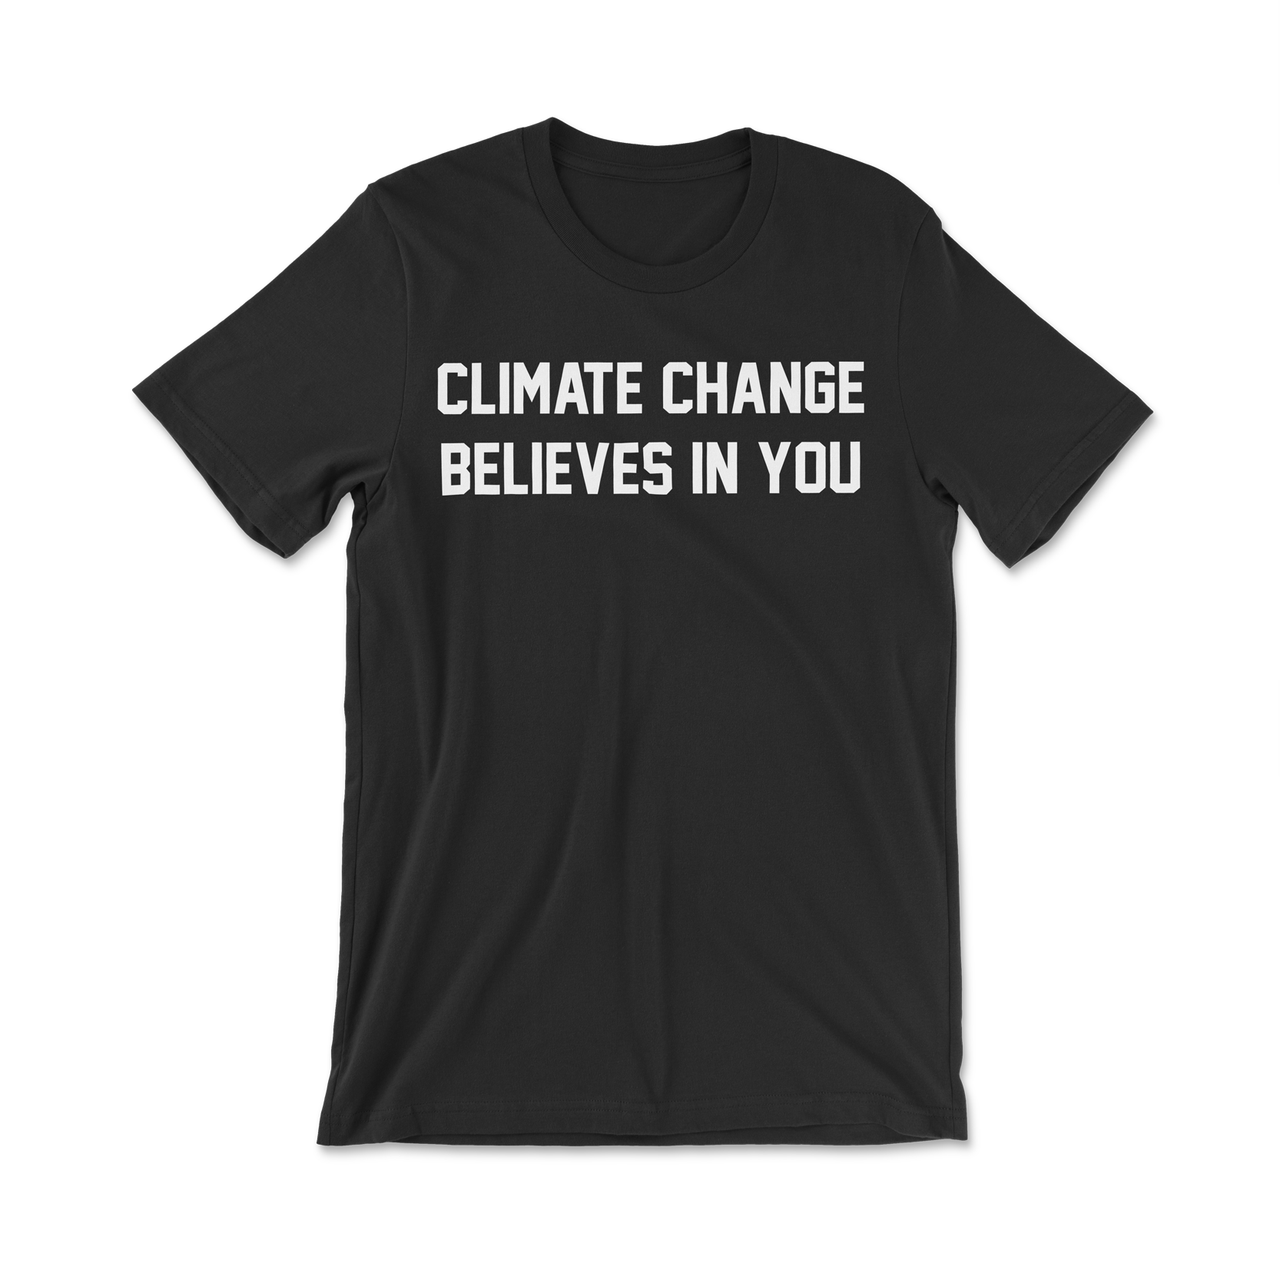 Climate Change Believes in You Black Shirt